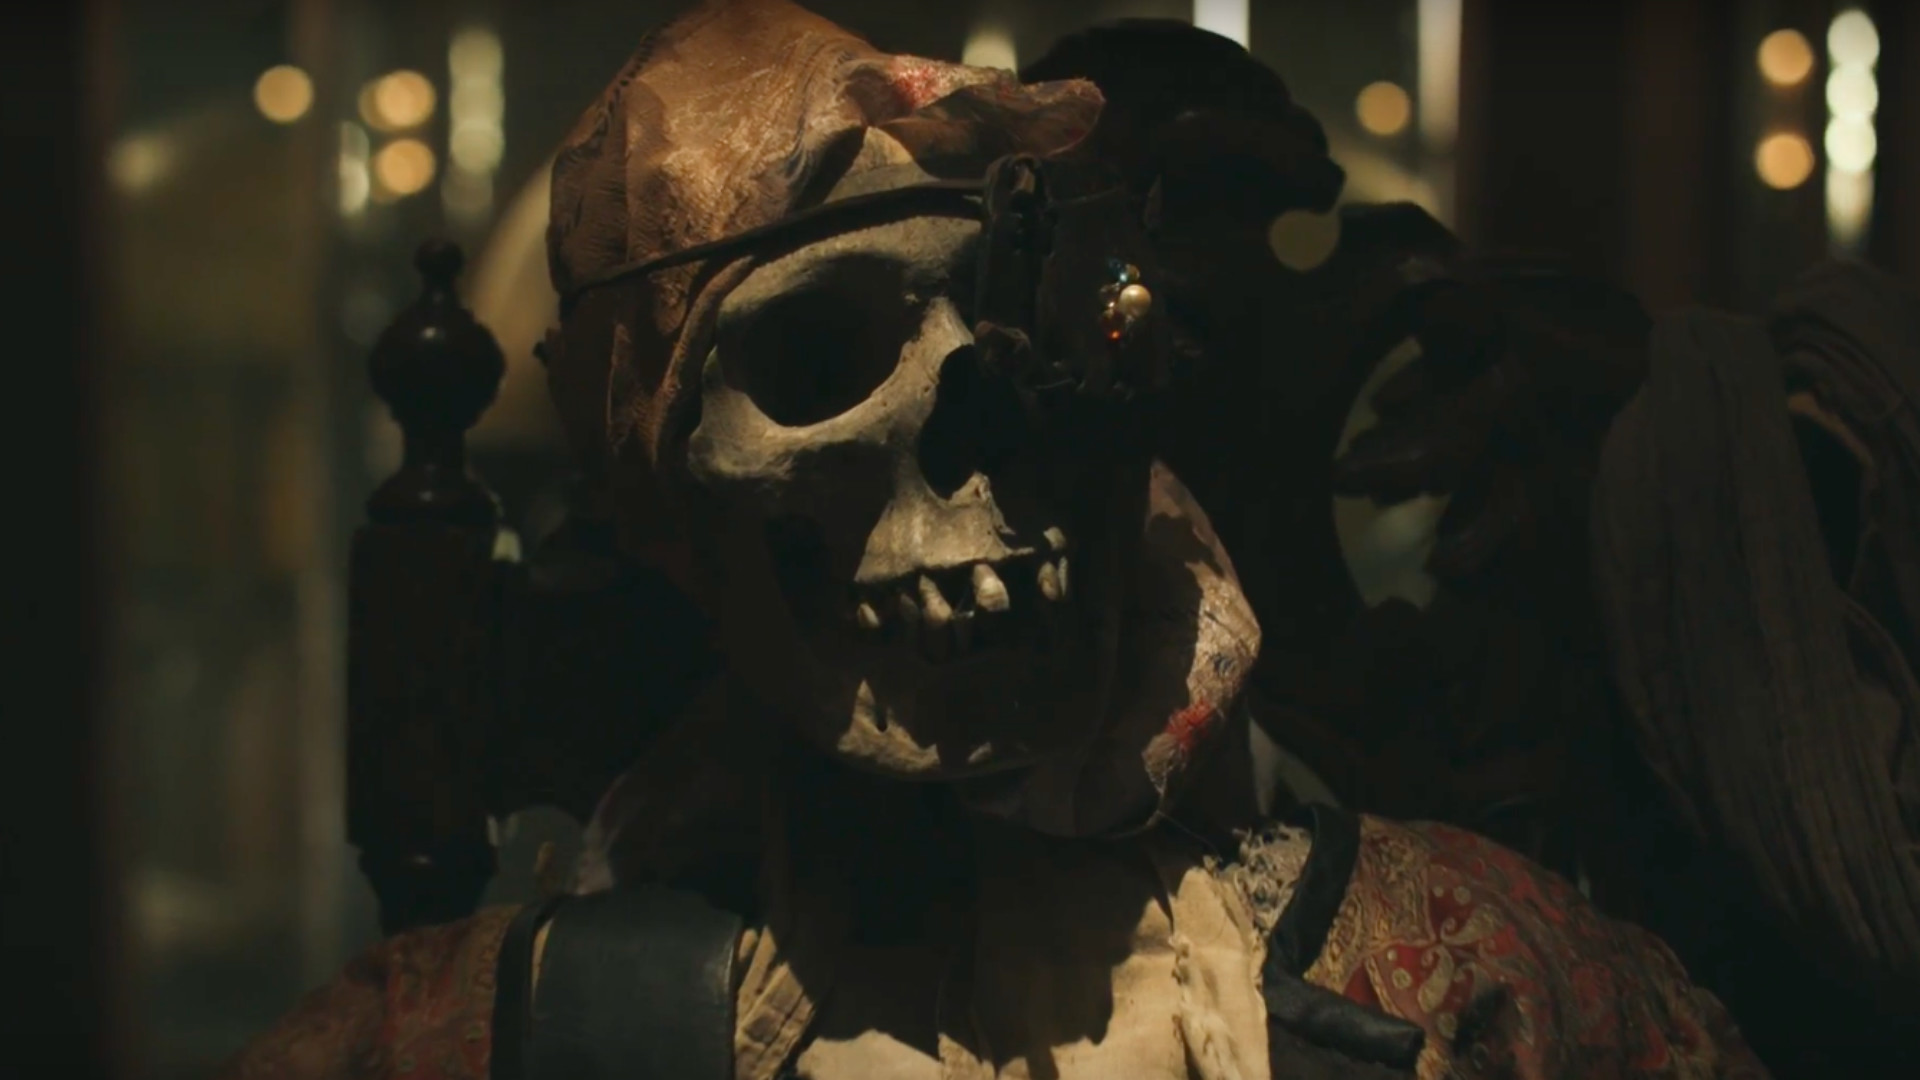 1920x1080 ... Sea of Thieves Pays Homage to The Goonies in Live Action Trailer